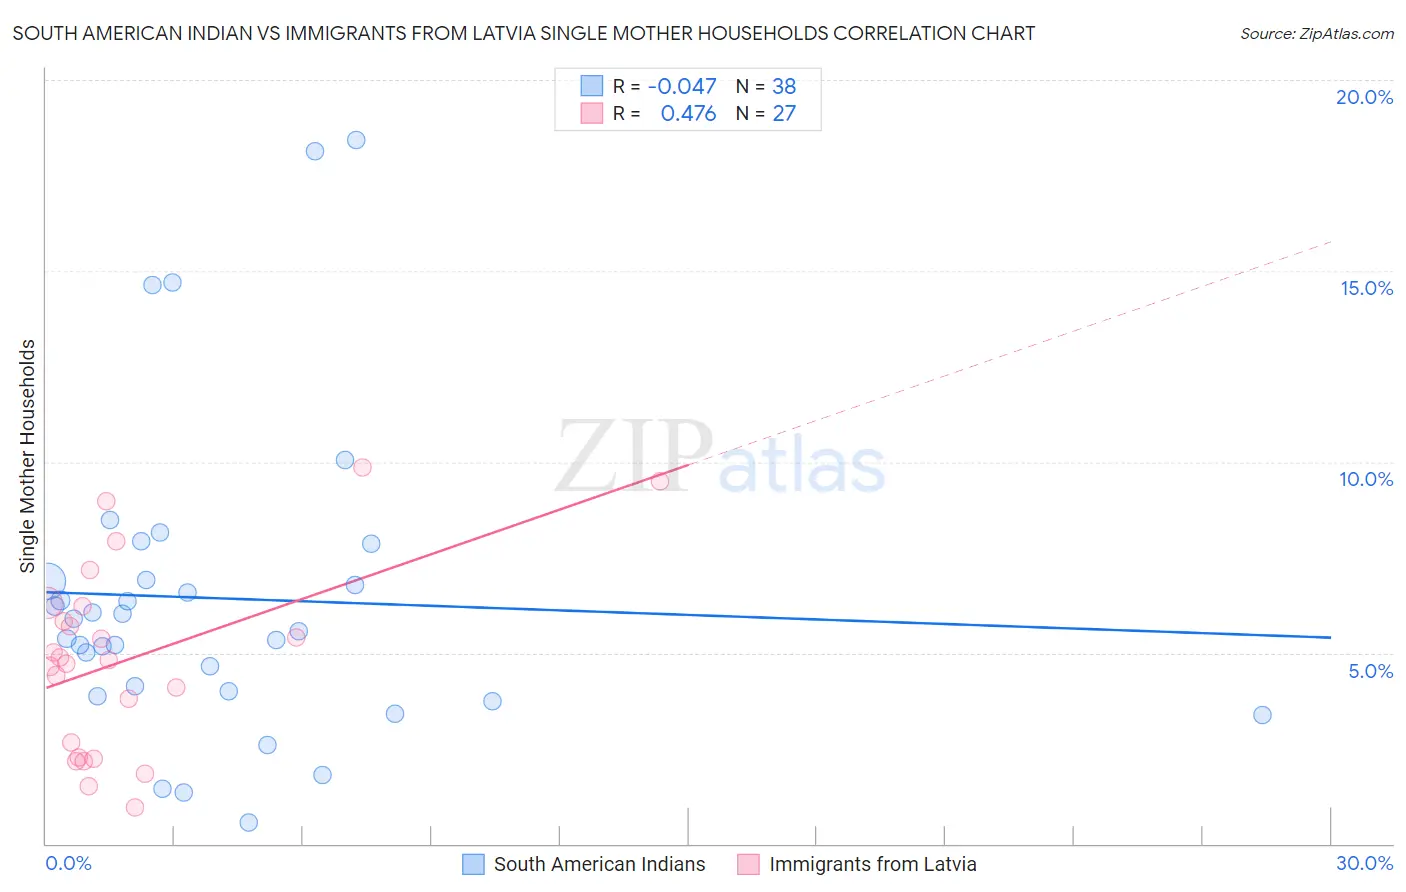 South American Indian vs Immigrants from Latvia Single Mother Households